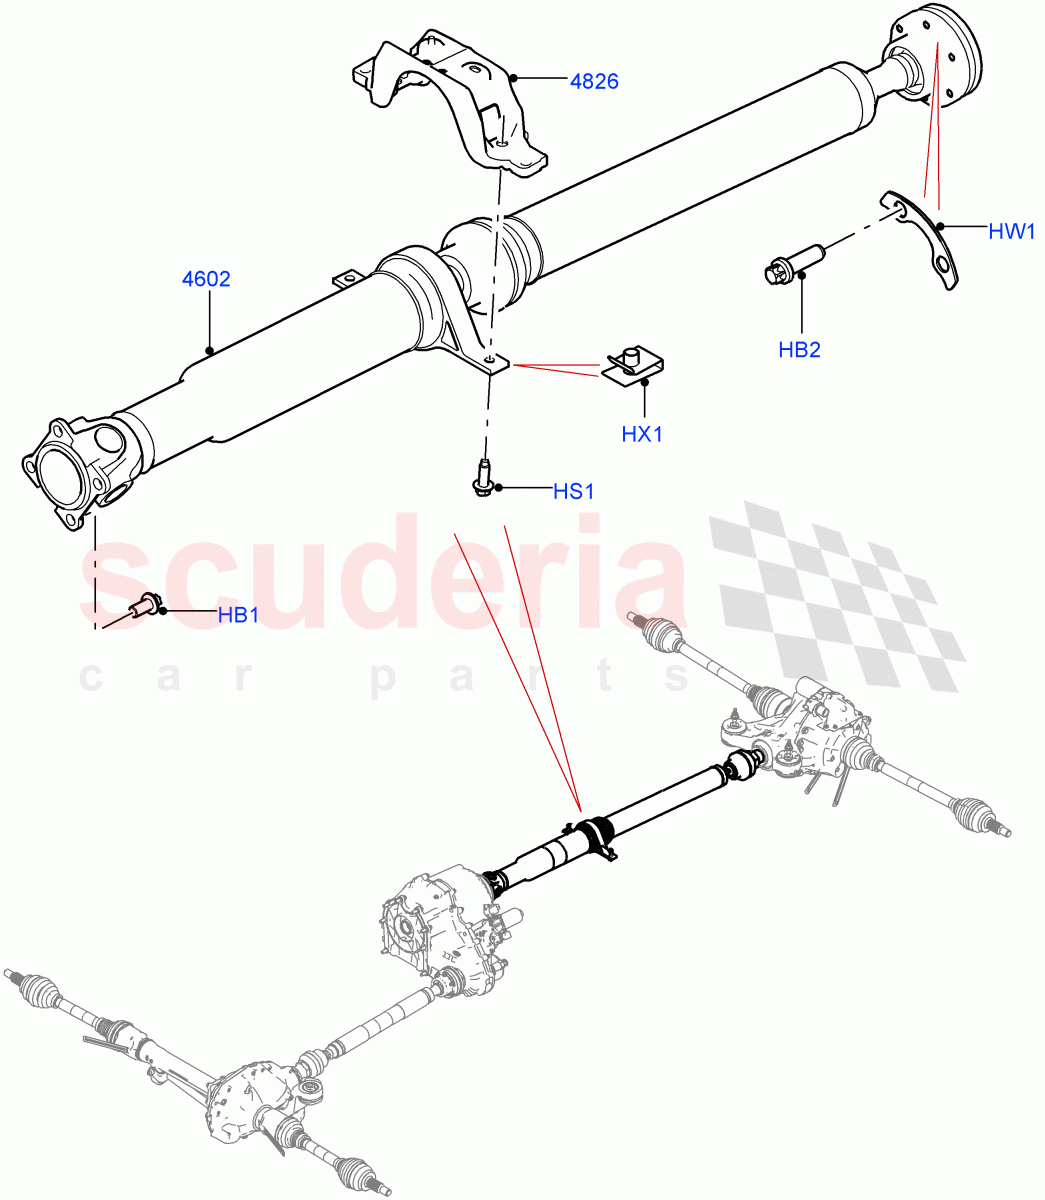 Drive Shaft - Rear Axle Drive(Propshaft)((V)FROMHA000001) of Land Rover Land Rover Range Rover Sport (2014+) [4.4 DOHC Diesel V8 DITC]